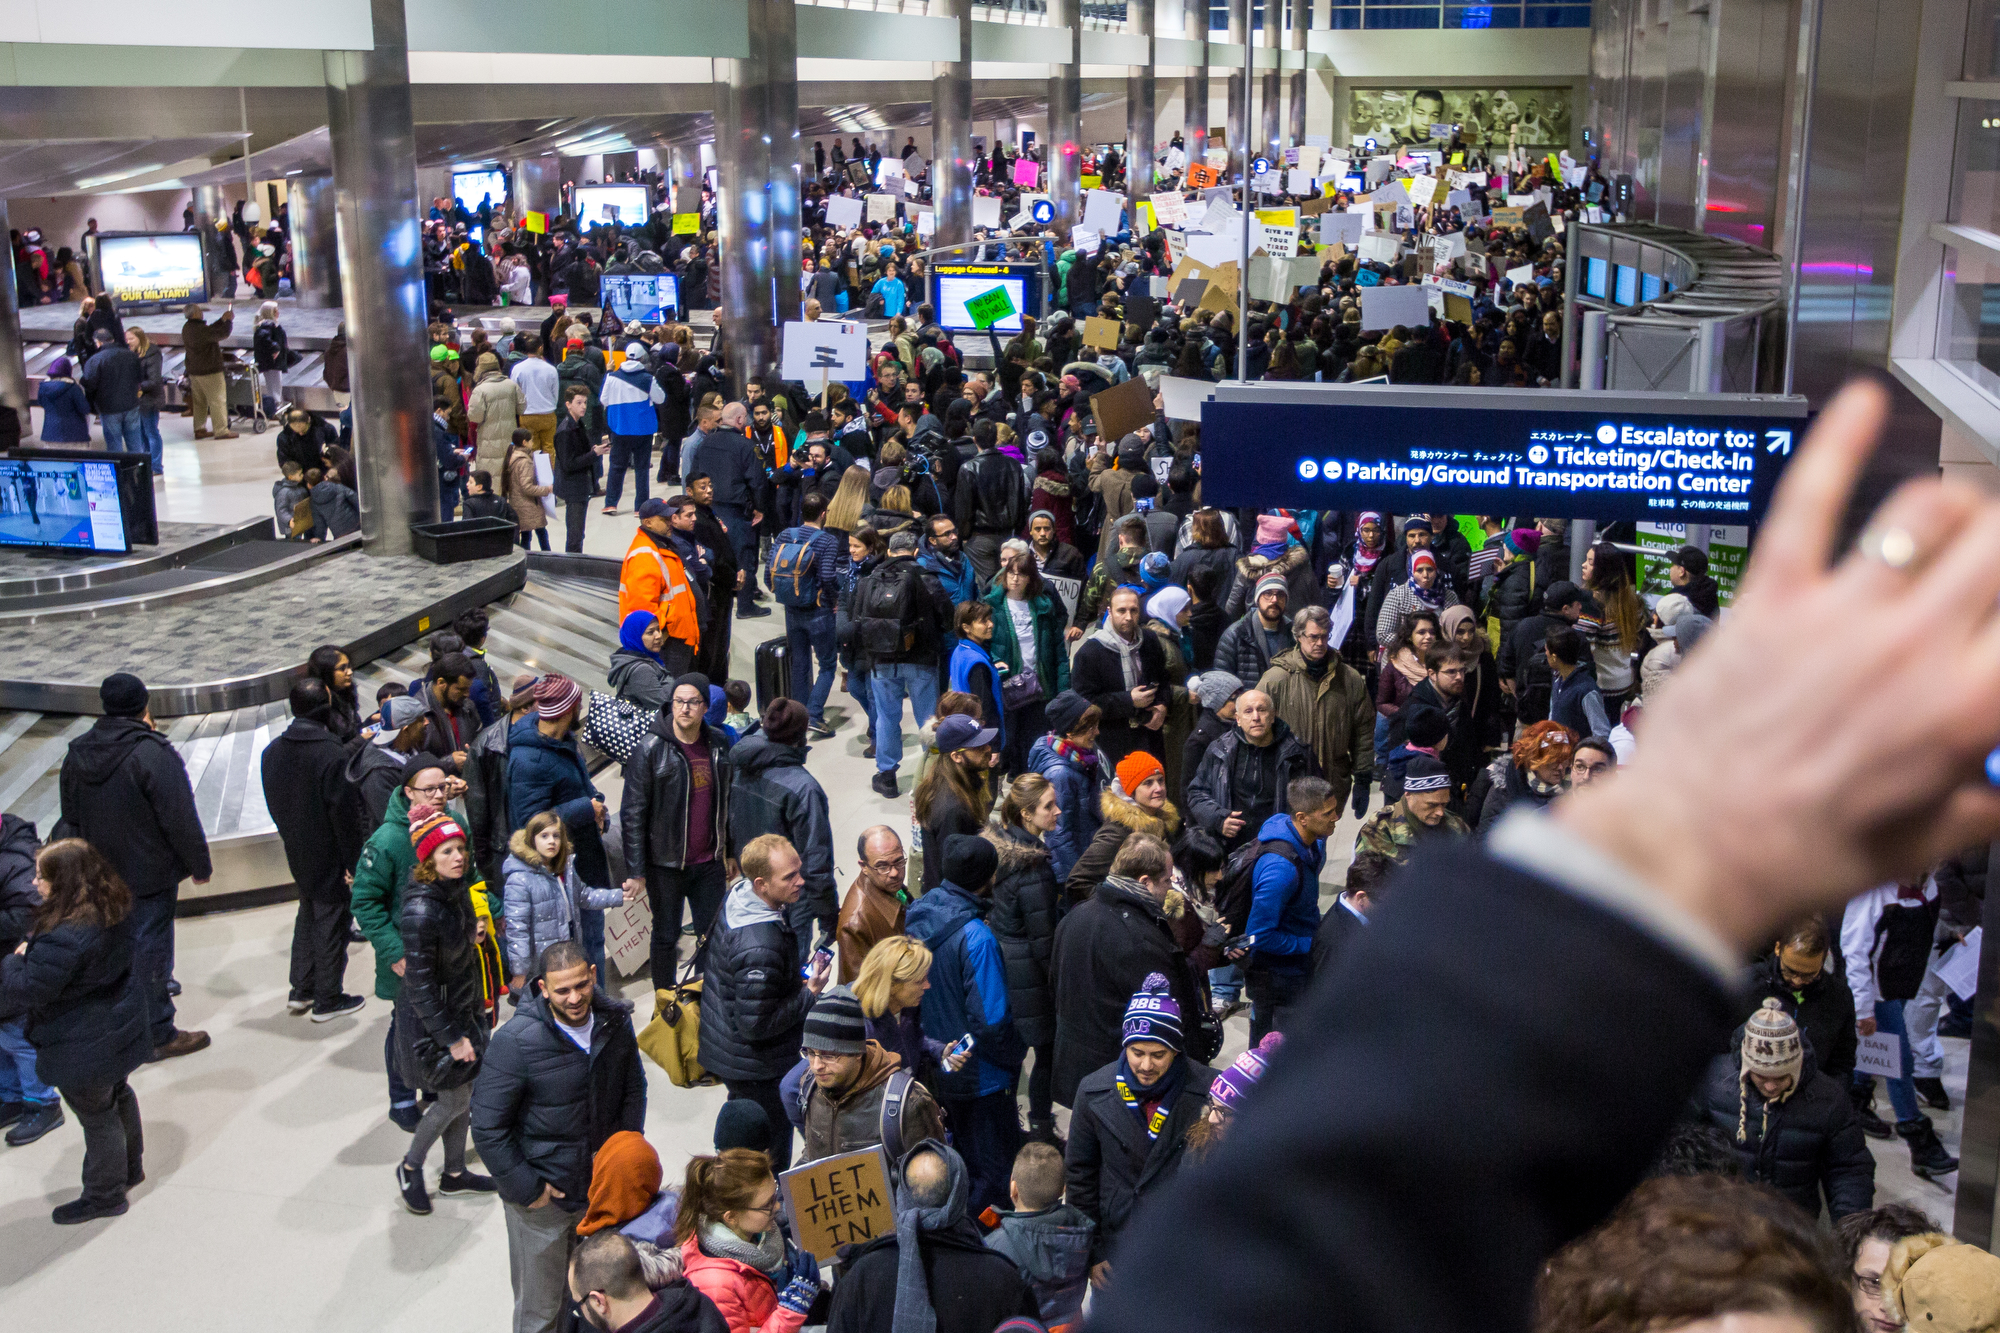  Thousands packed into the baggage claim at Detroit International Airport to protest President Trump and his immigration policy on Sunday, January 29, 2017. Matt Weigand | The Ann Arbor NewsMatt Weigand | The Ann Arbor News 